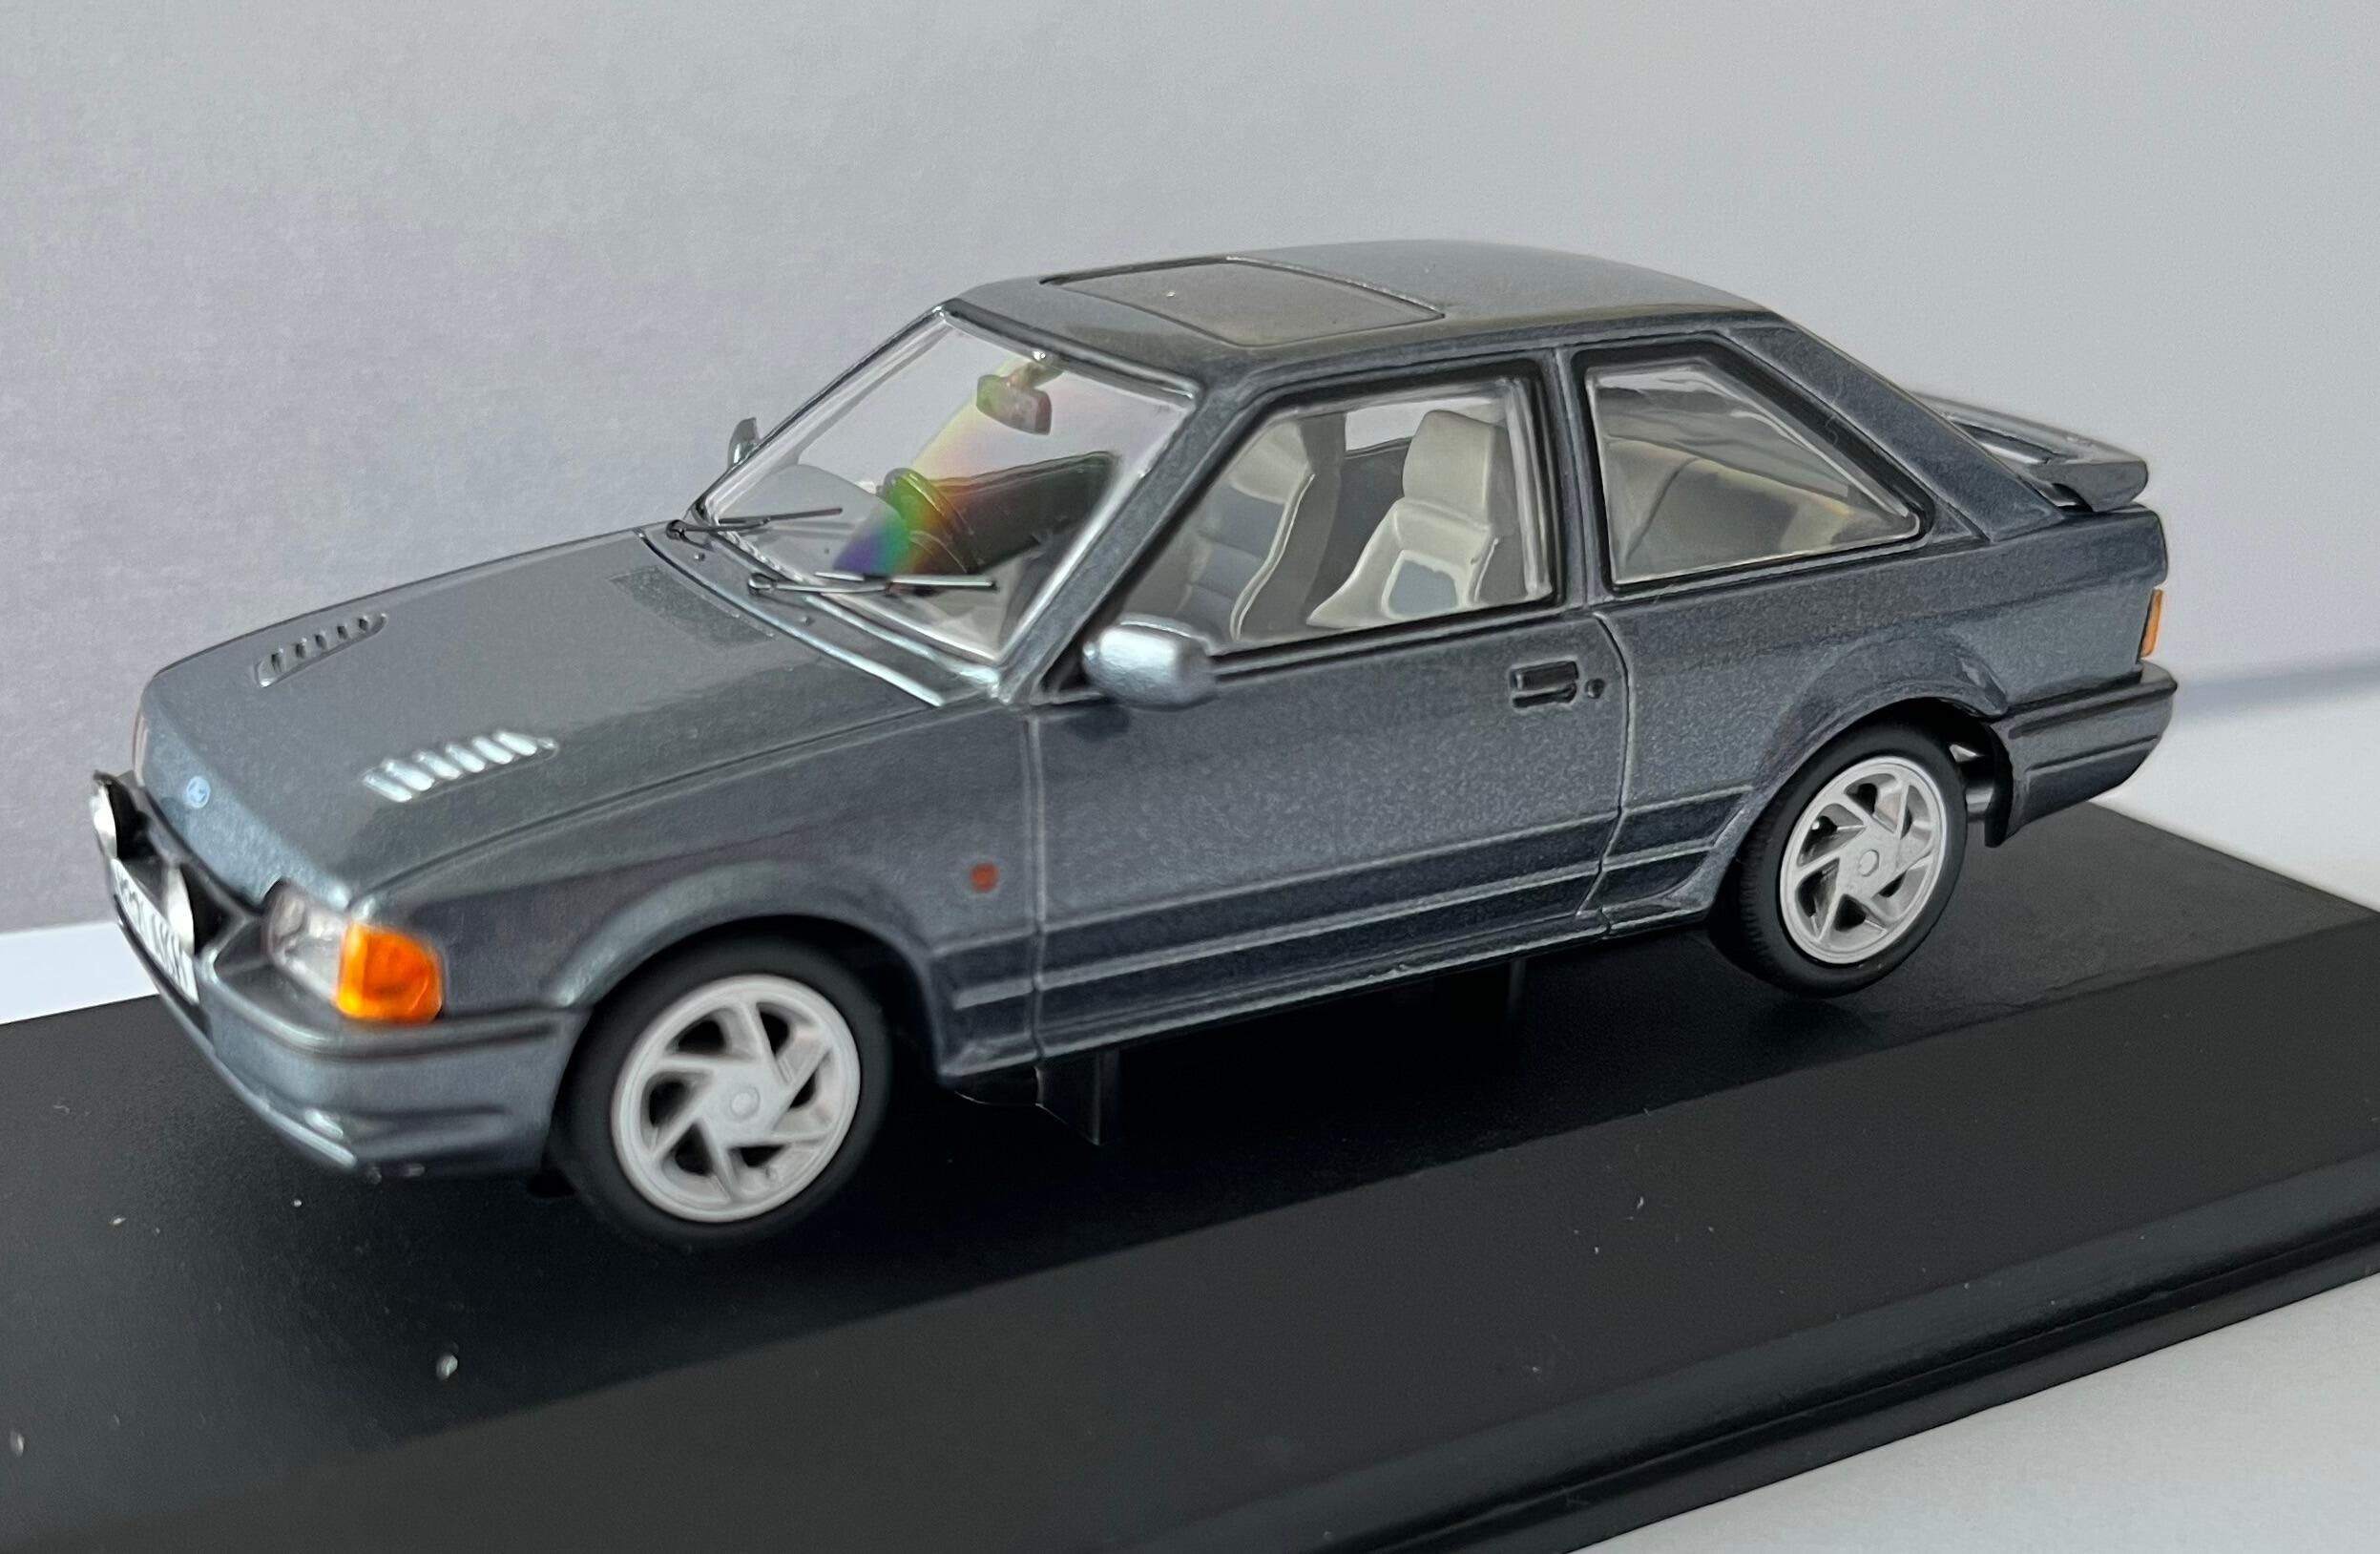 Ford Escort mk4 RS Turbo (1990 Specification) in mercury grey, 1:43 scale model from Corgi Vanguards, VA14304, limited edition model